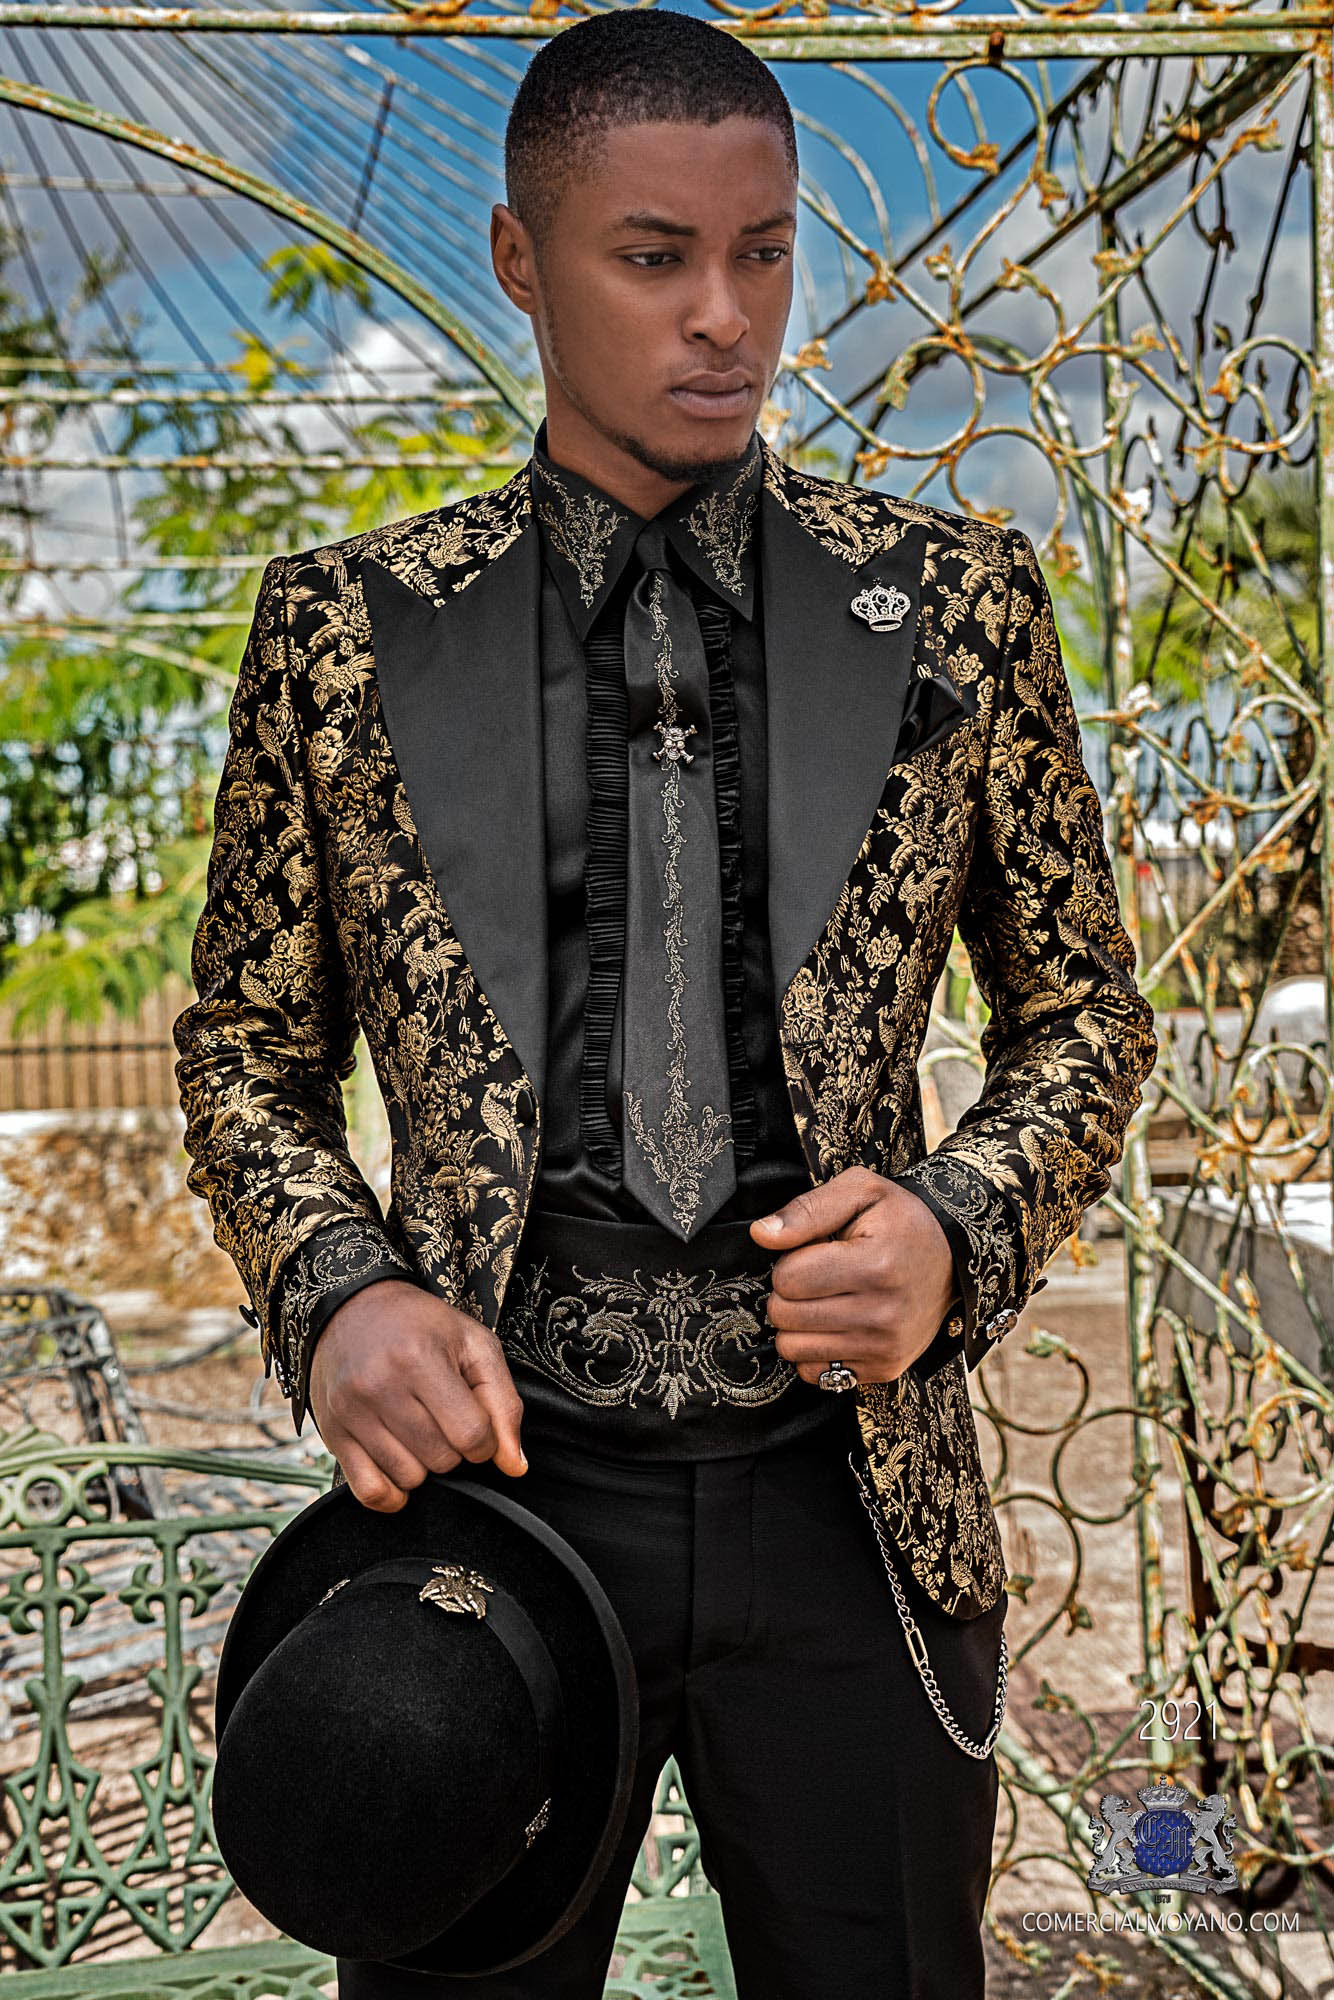 write a letter The other day monster Black pure silk men's fashion party blazer gold floral brocade 2921